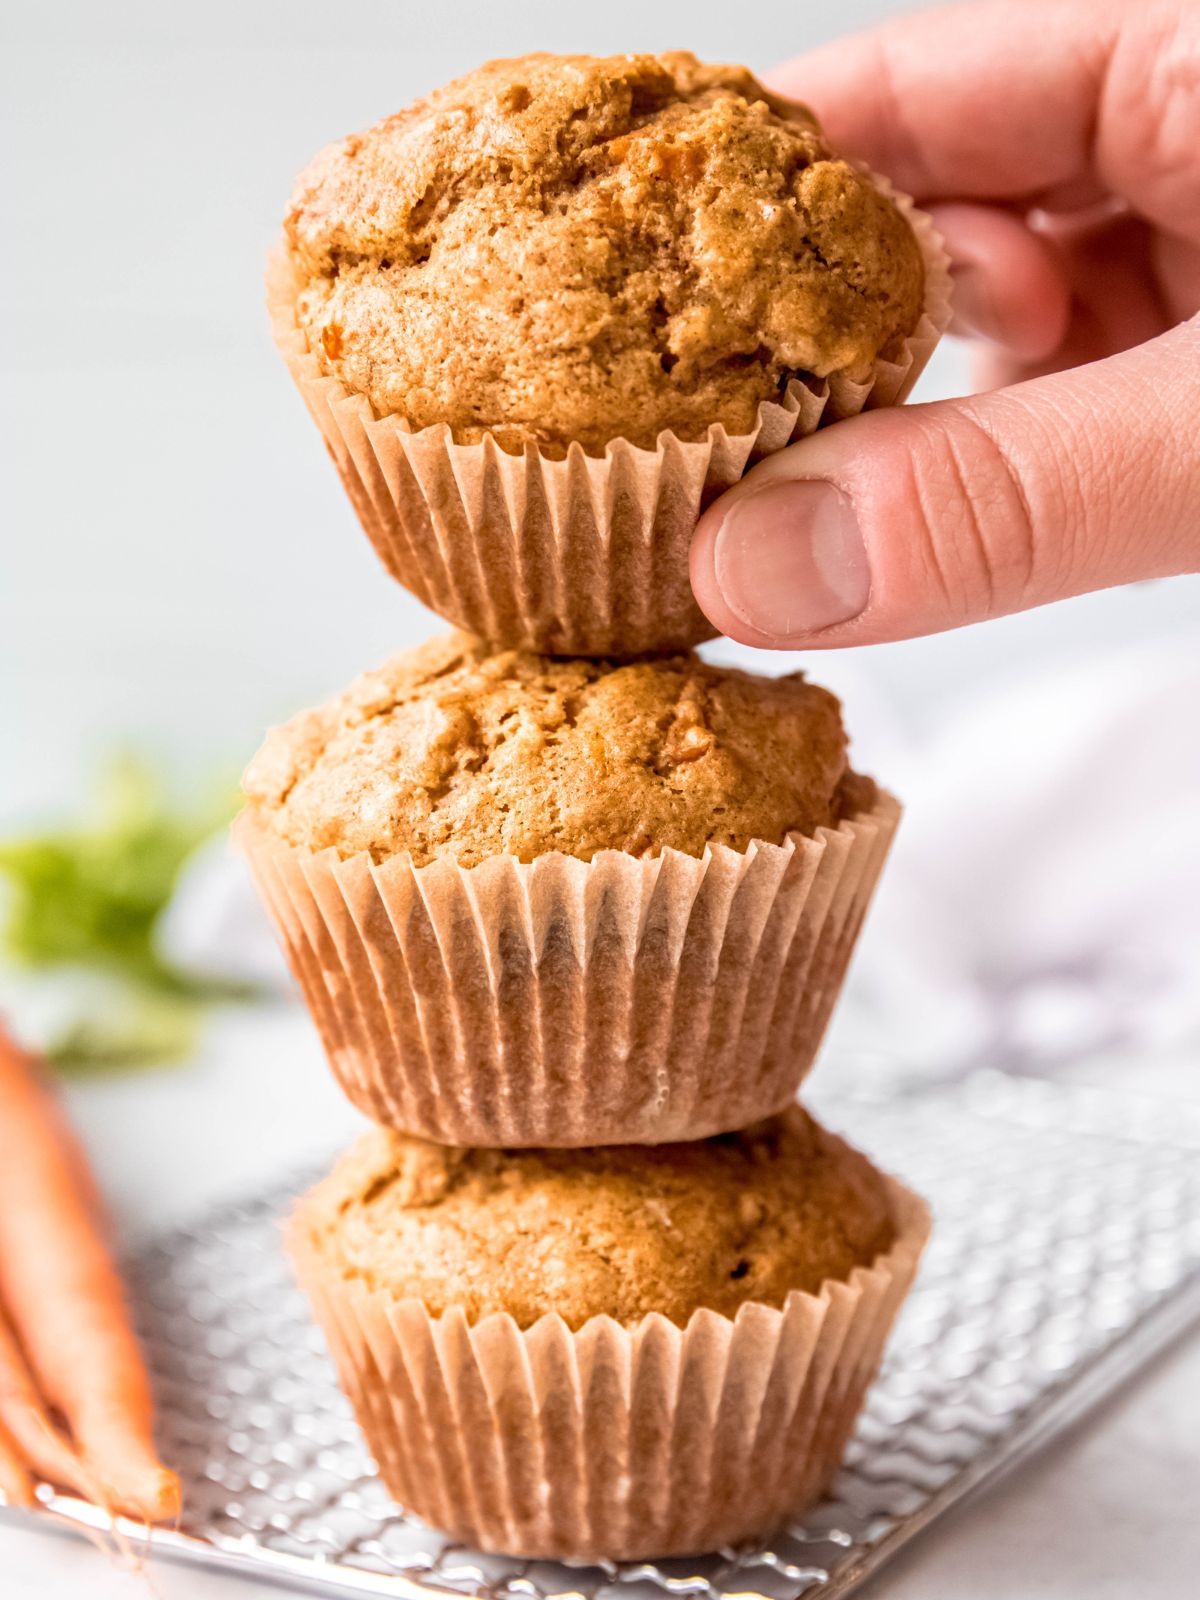 hand pulling the top muffin from a stack of 3 carrot banana muffins on a cooling rack.